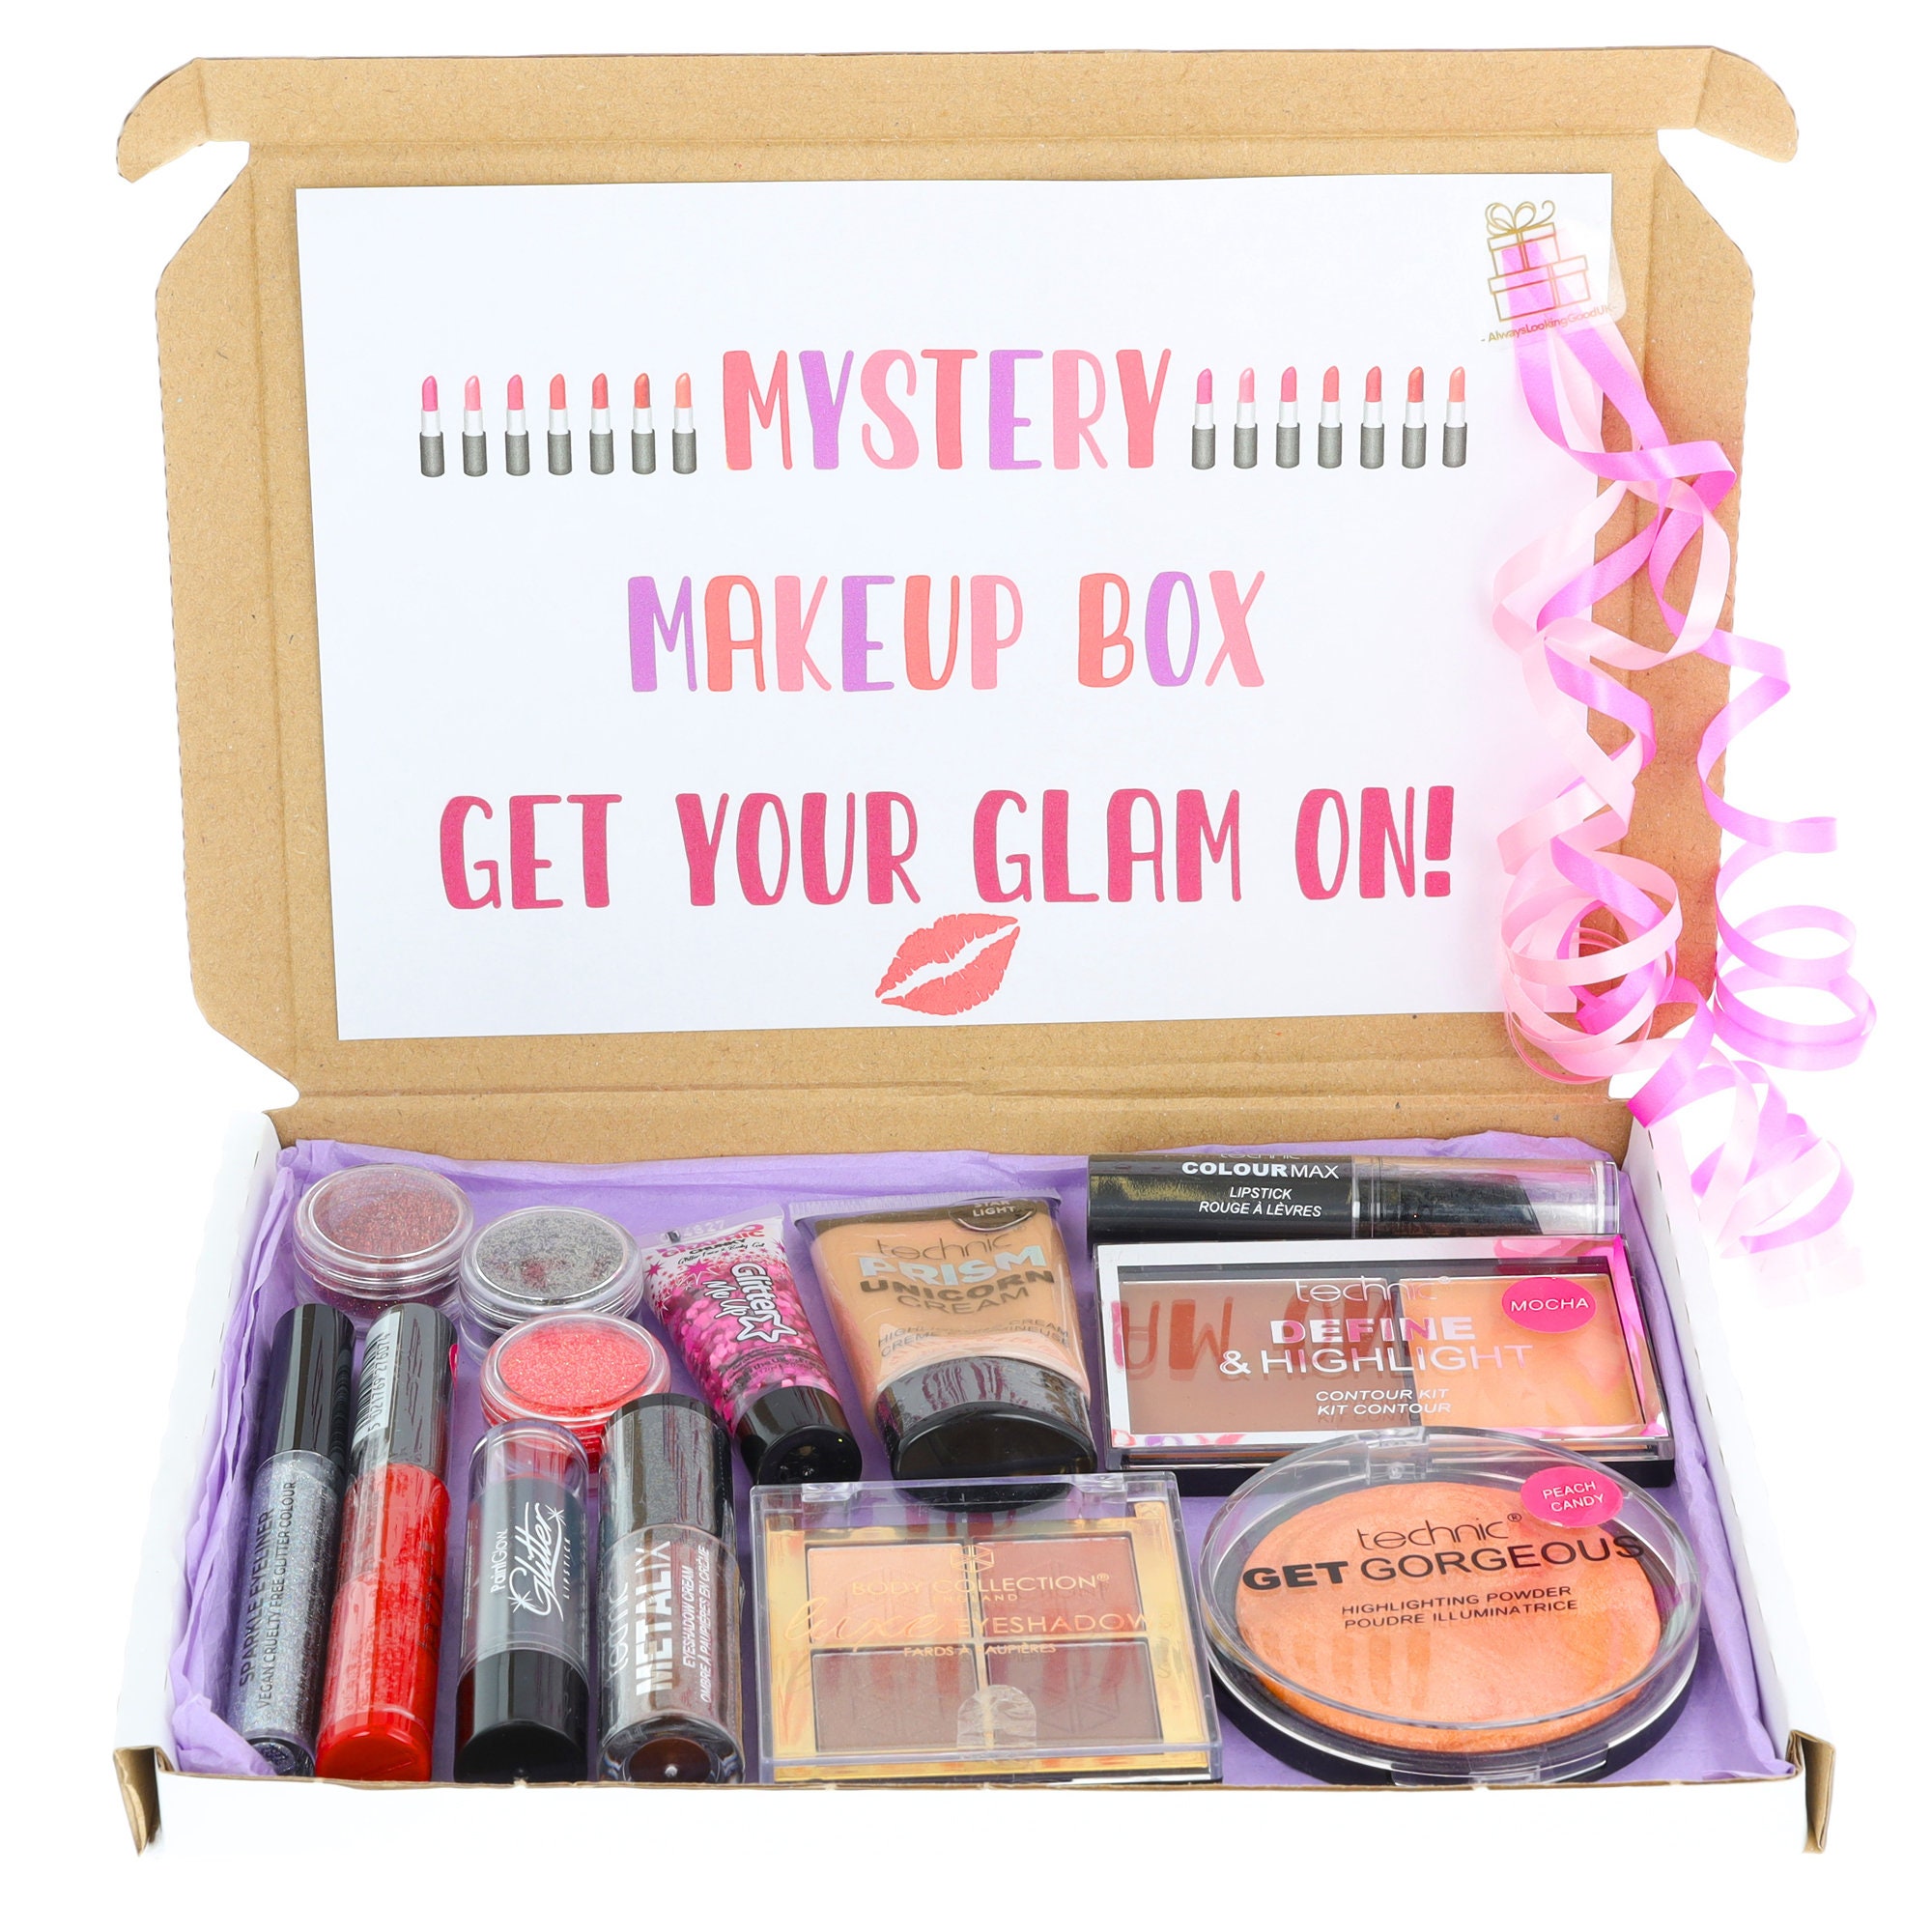 The Makeup Box: An Unexpected Gift, and Happy 2015!